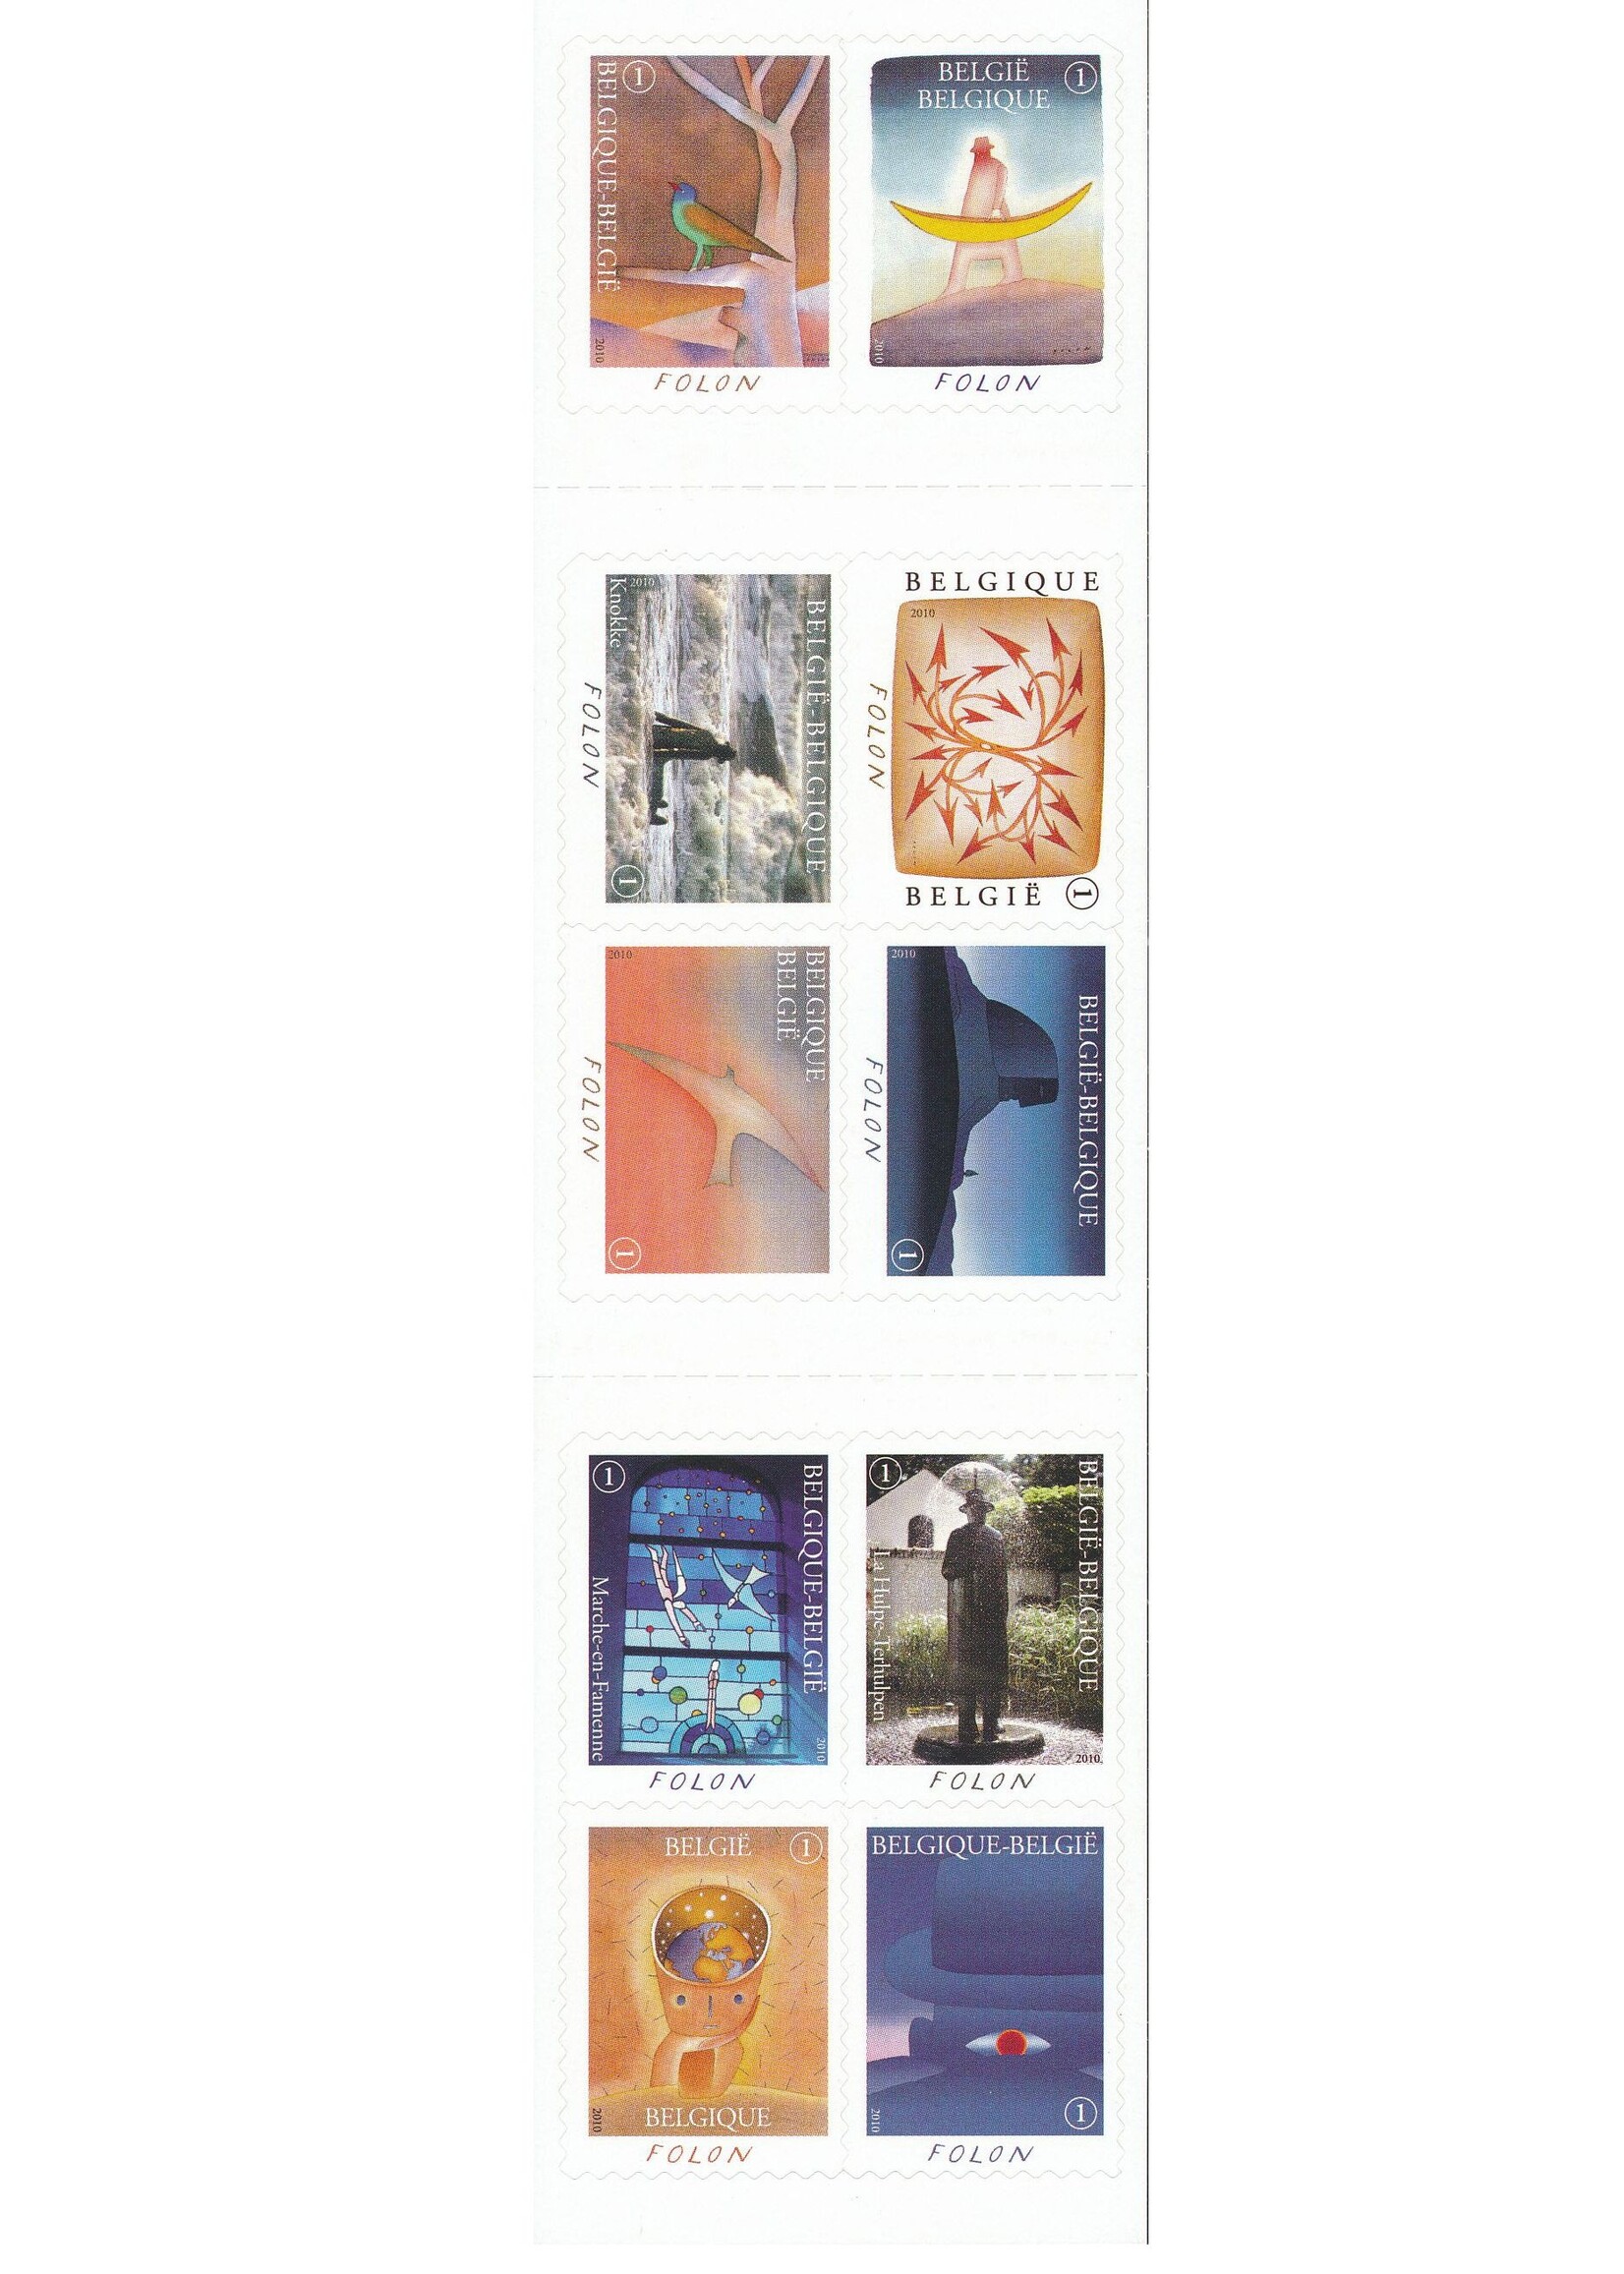 Theme Art - Booklet with 10 self-adhesive stamps - Rate 1, Belgium